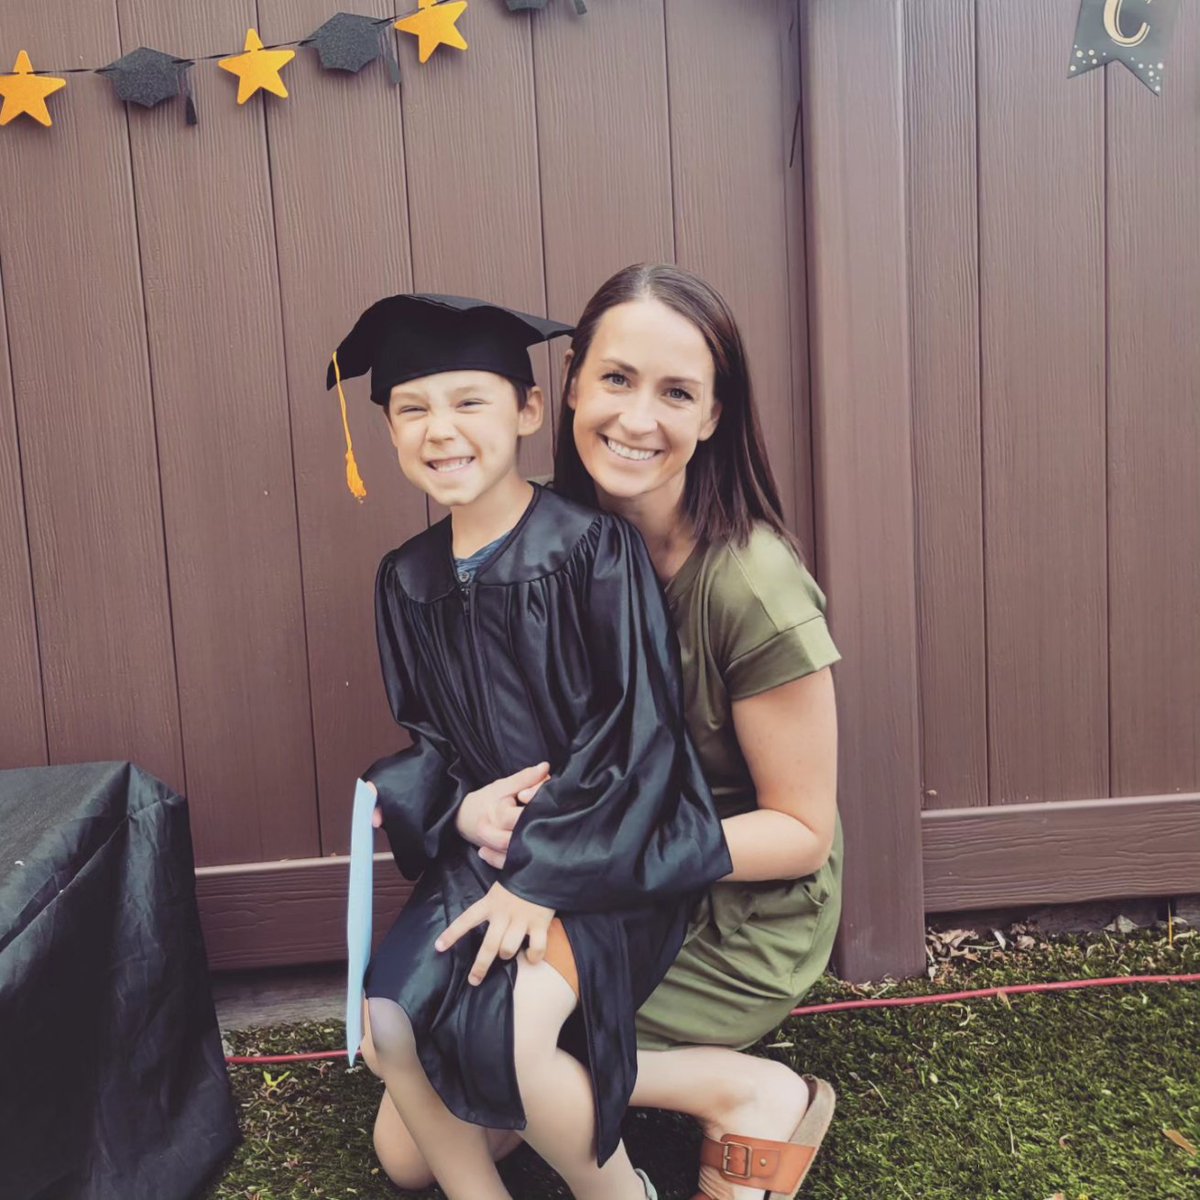 Today was emotional. From another 'no' to not being picked for #PBRisingStars to my oldest graduating Pre-k. Cue waterworks 🥺

I realized though, both our journeys are just starting. Every path is different.
#writingcommunity, it doesn't have to end here. It's just beginning. ❤️